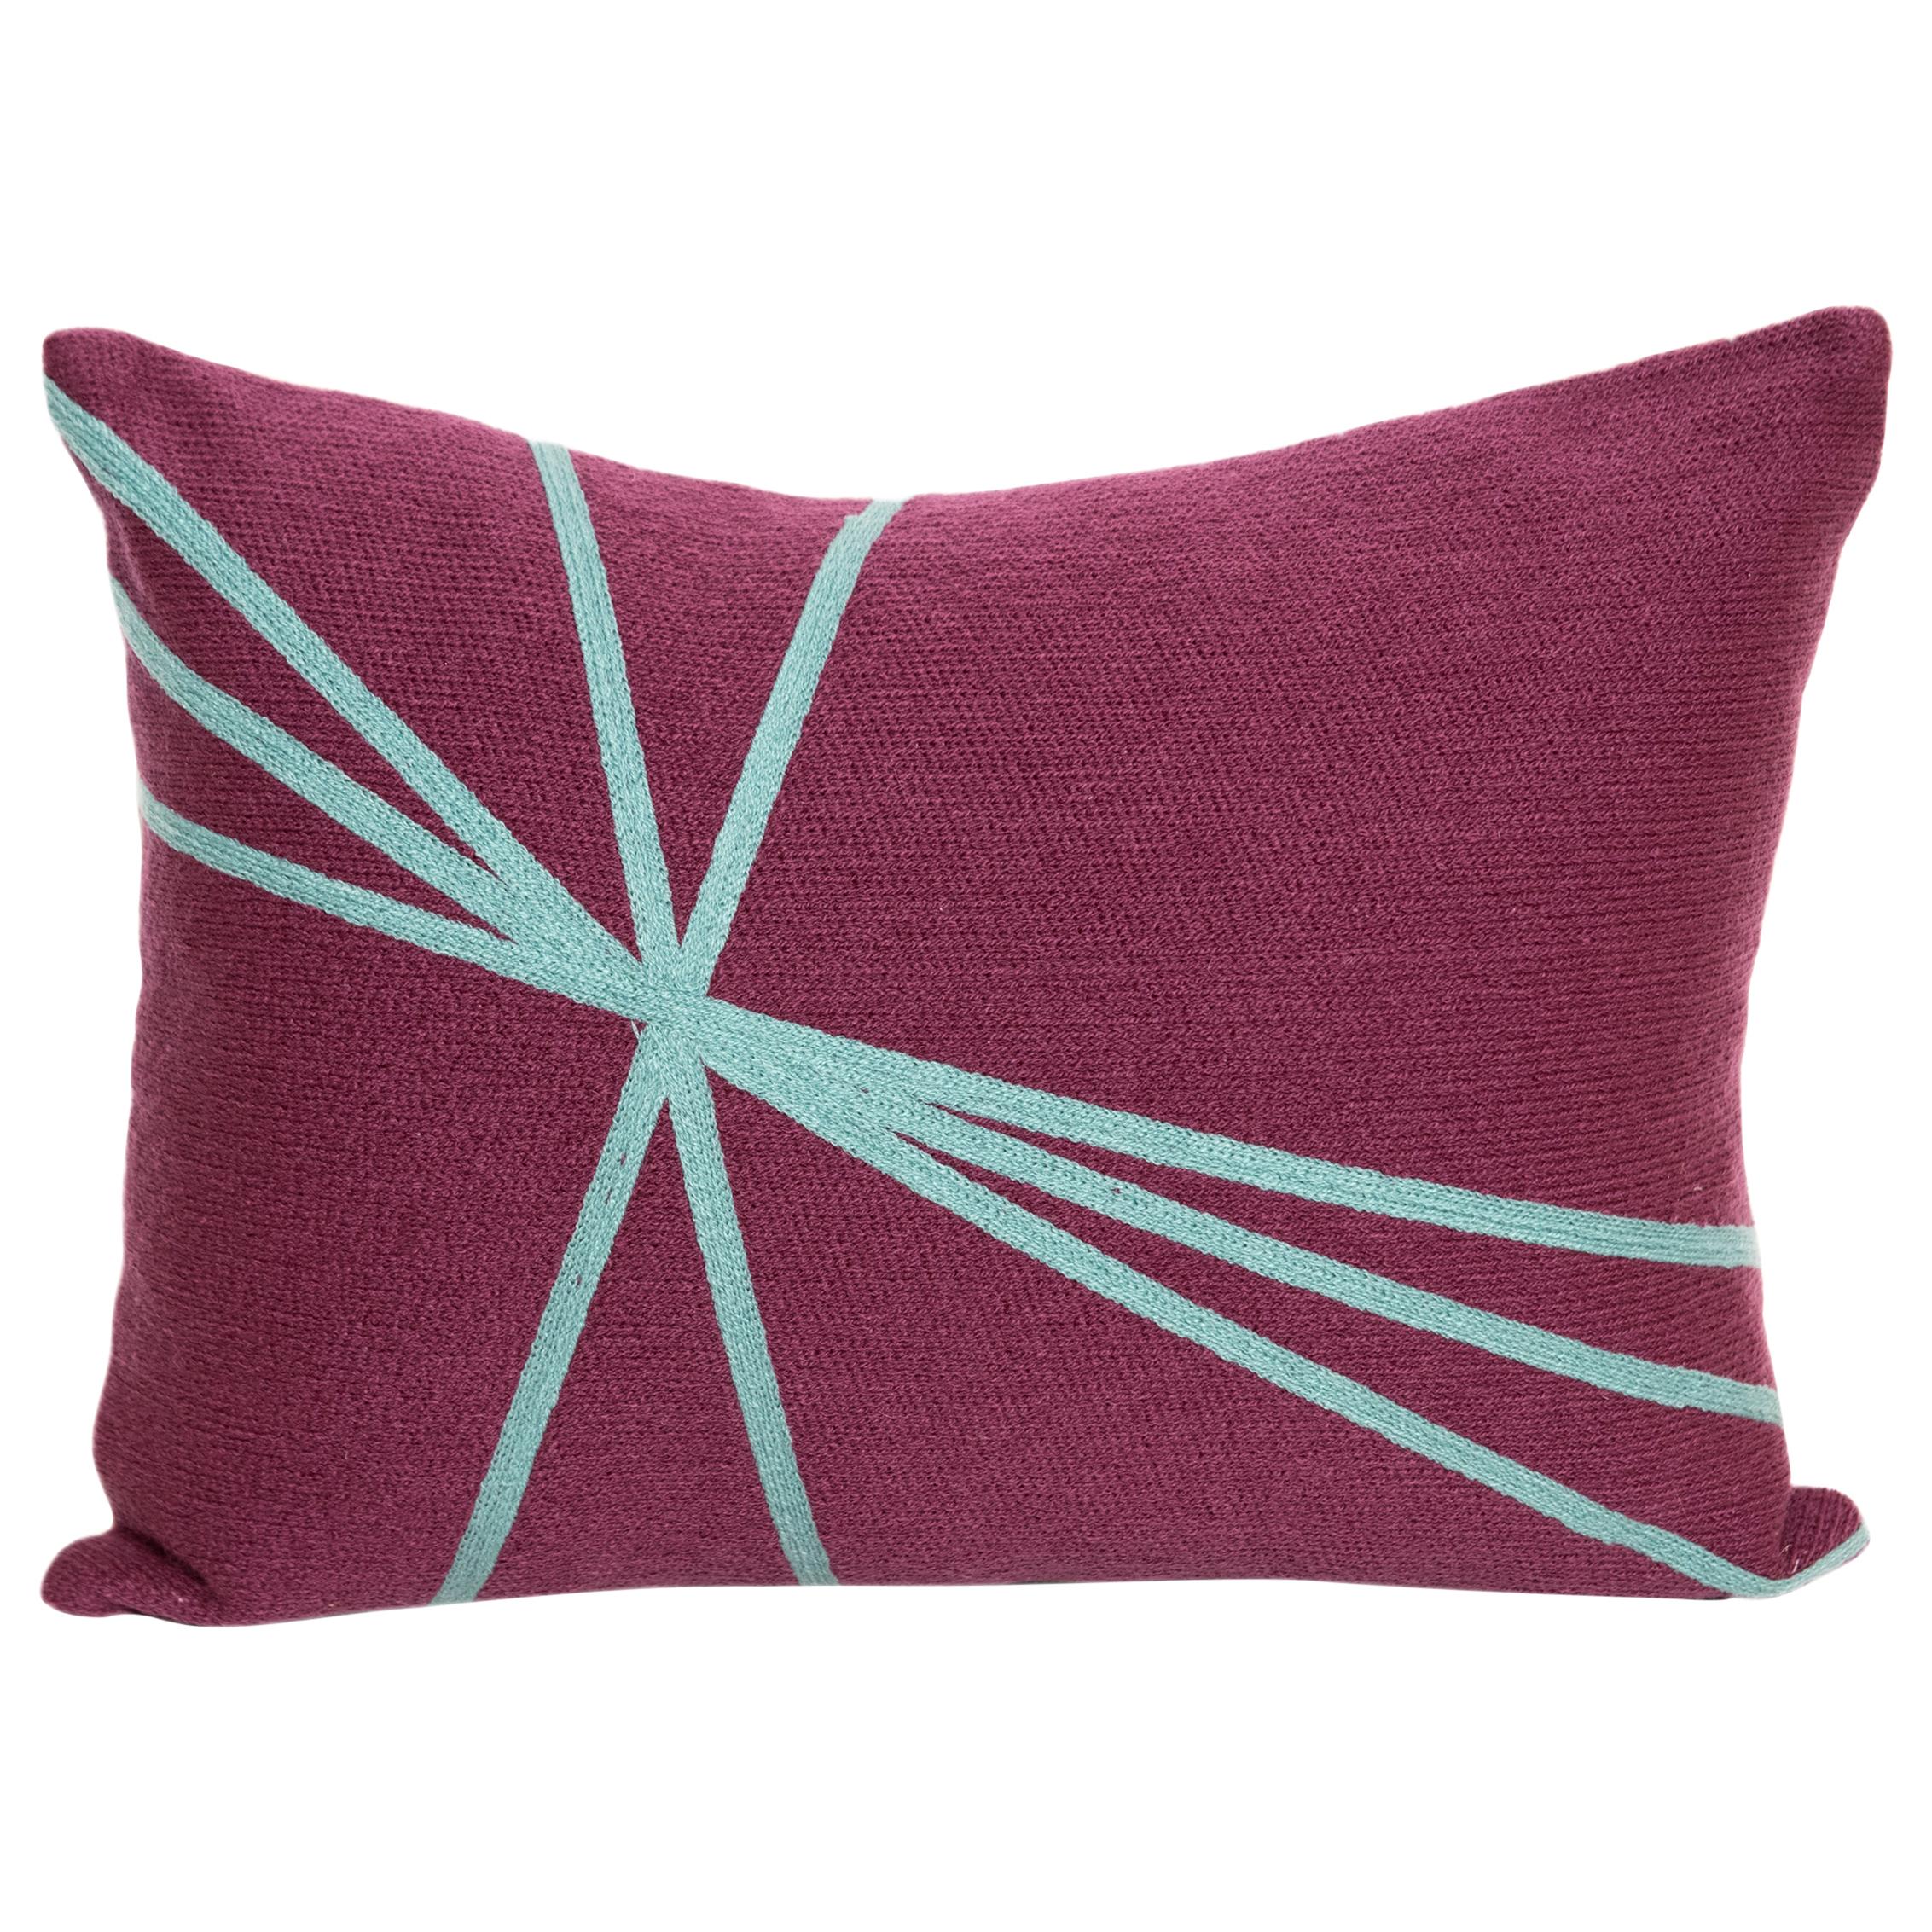 Contemporary Modern Embroidery Pillow Cushion Cotton Lines Pulple Turquoise For Sale